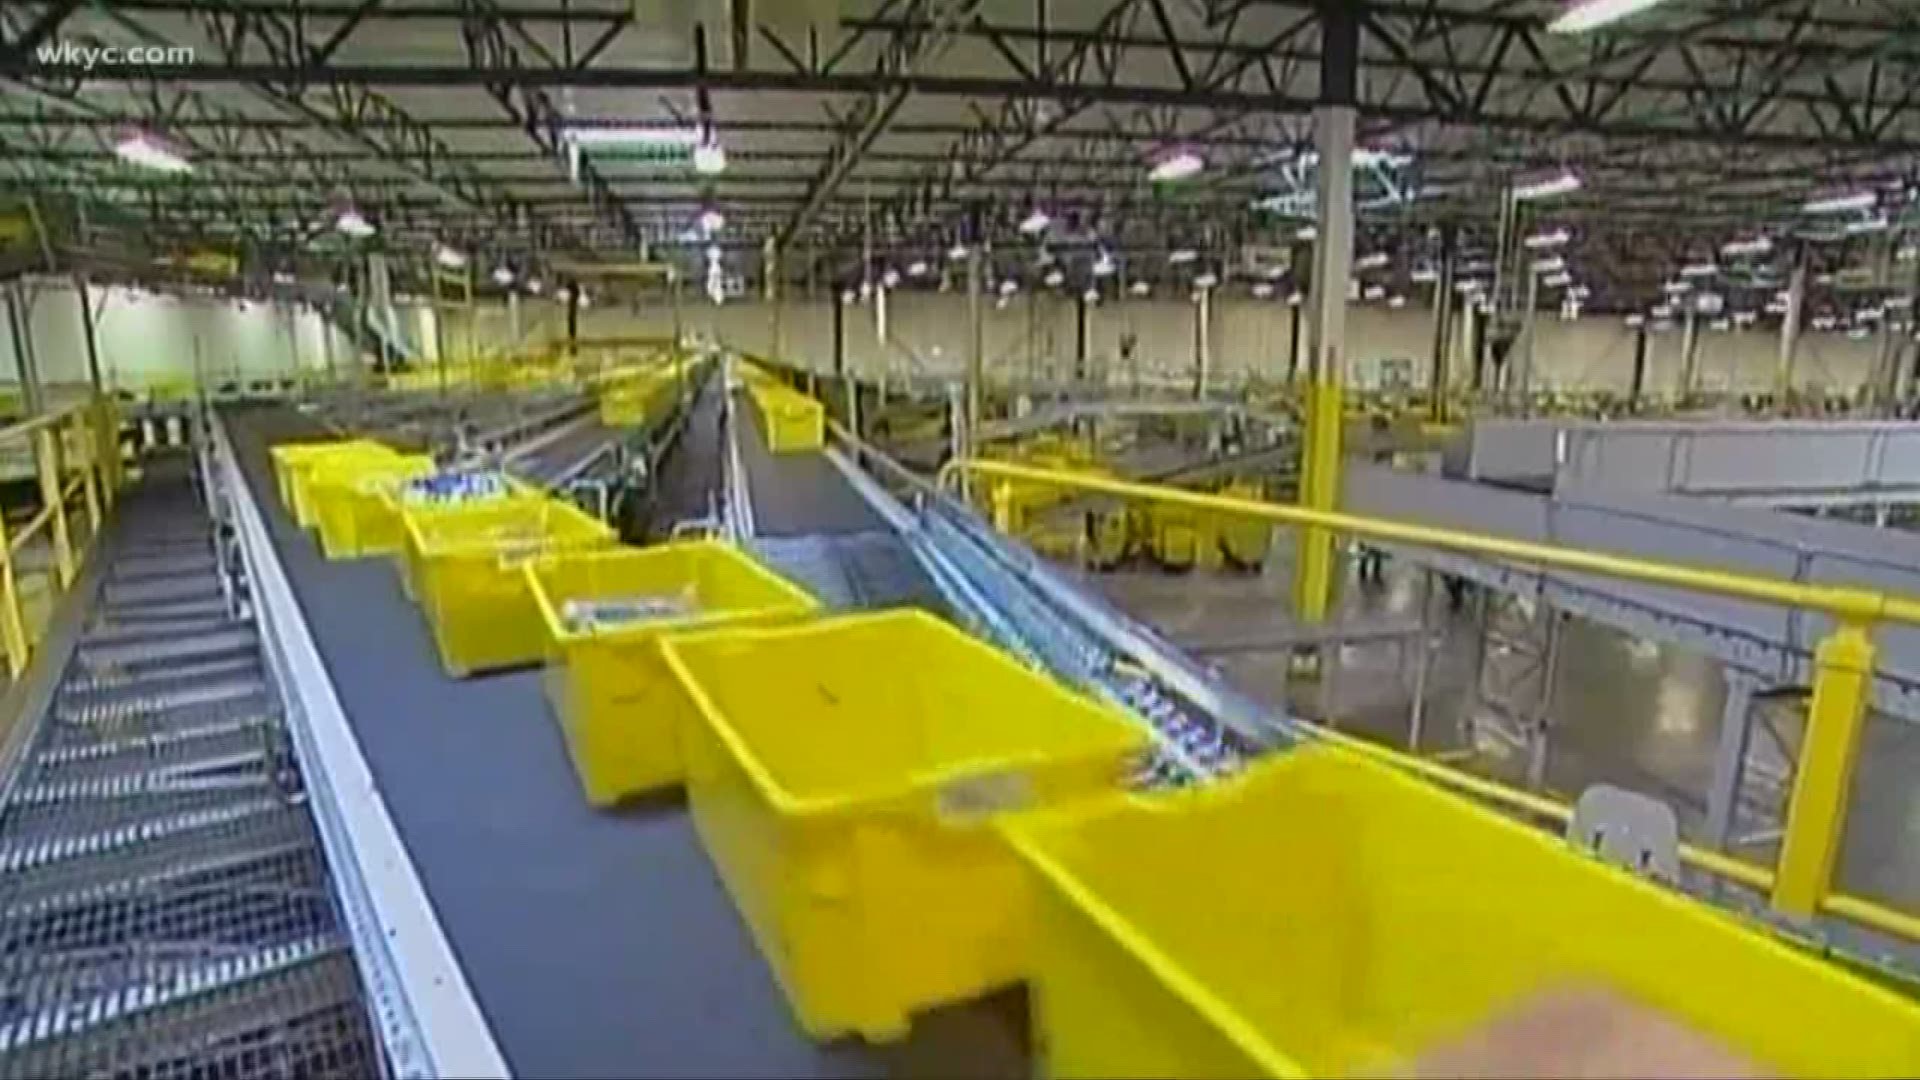 A decision by Amazon to cancel its contract with Atlanta-based Inpax Shipping Solutions will impact more than 100 workers in Ohio with layoffs commencing this month.